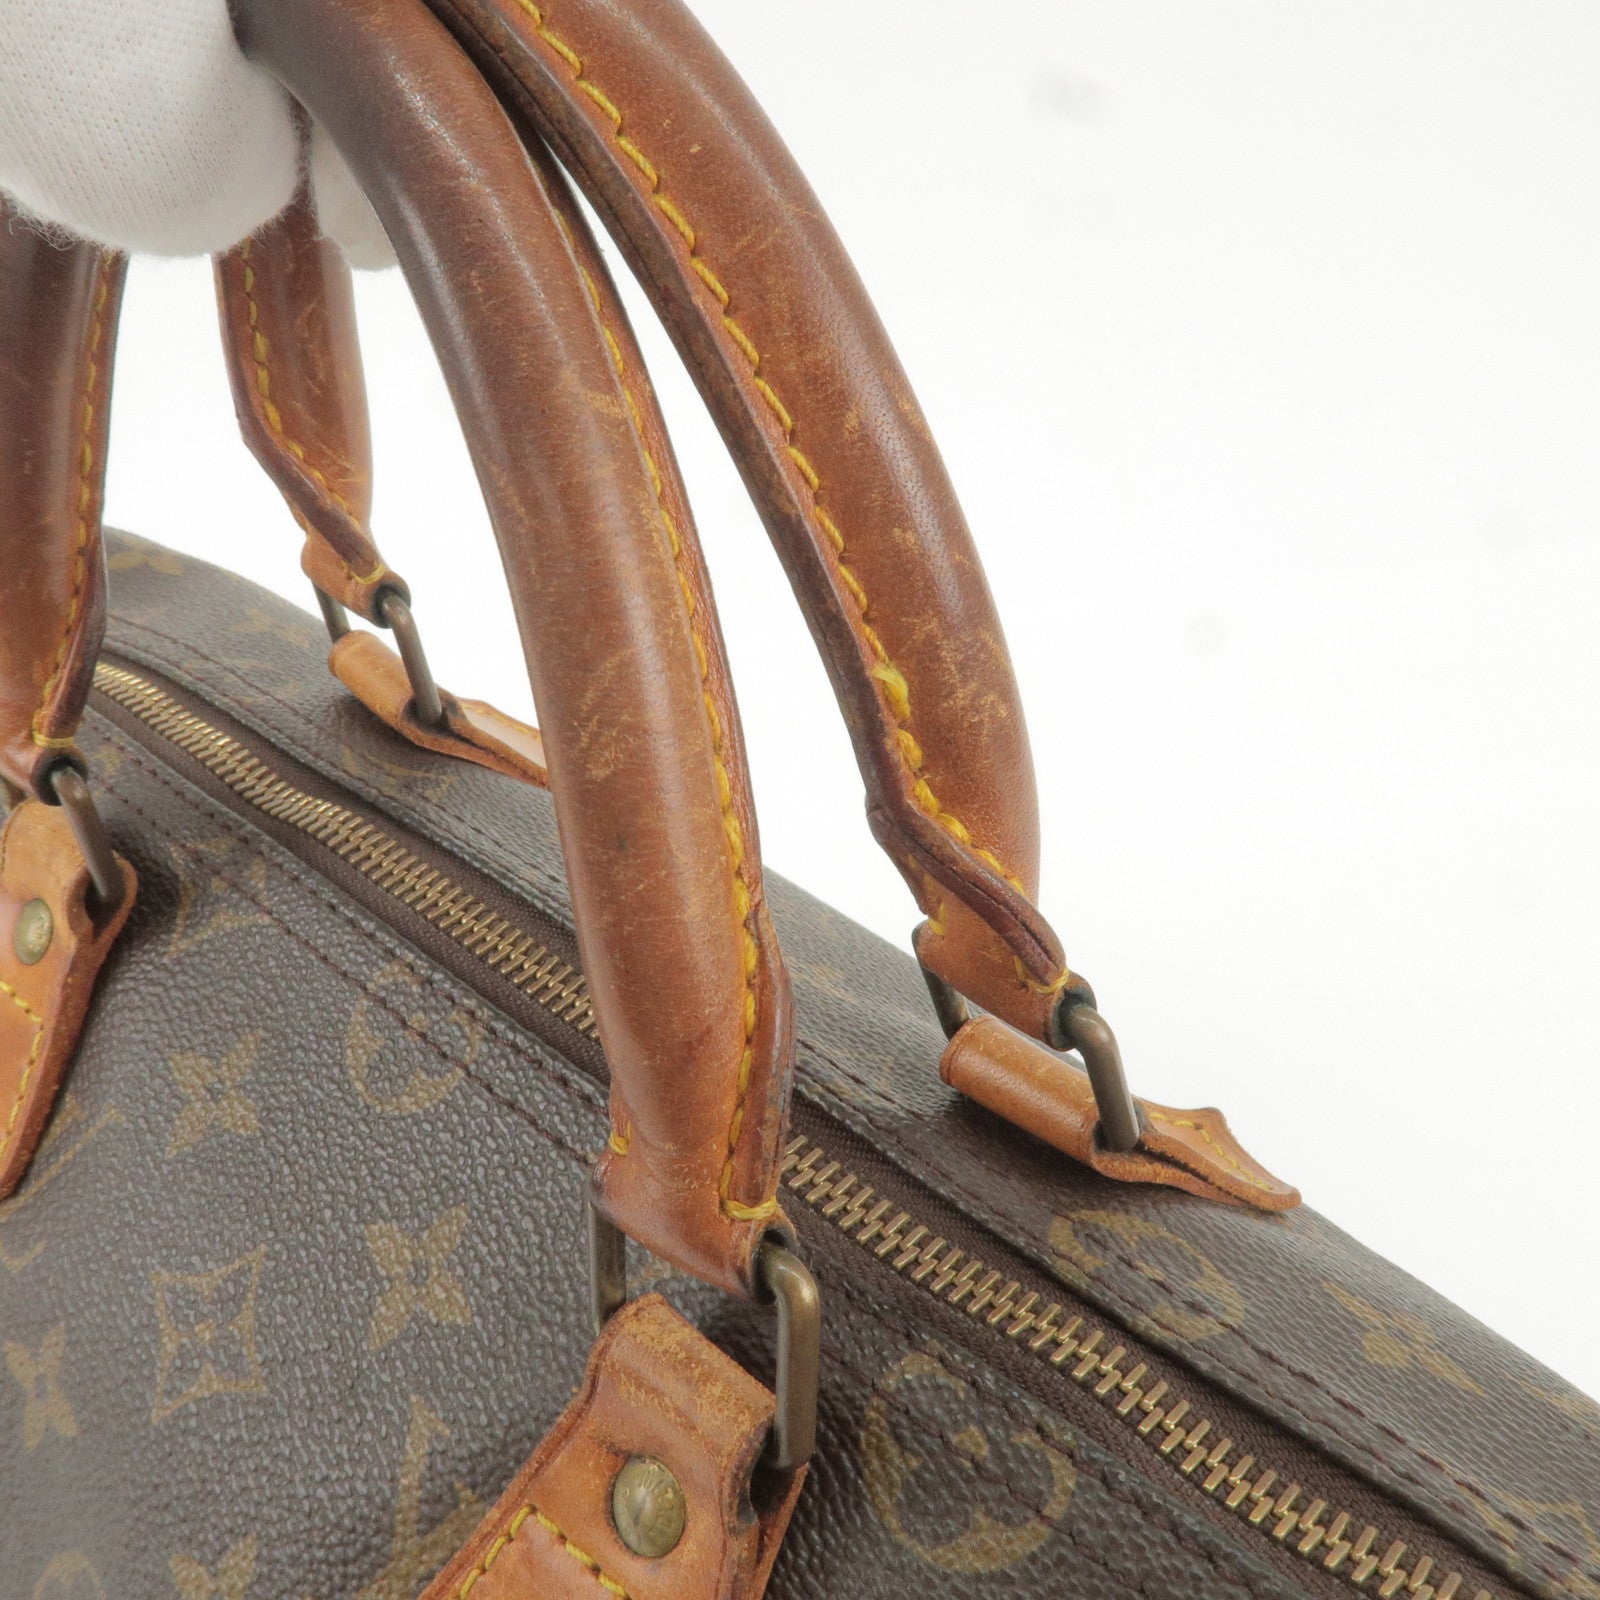 Louis Vuitton 2010 pre-owned Keepall 55 Bandouliere Holdall Bag - Farfetch